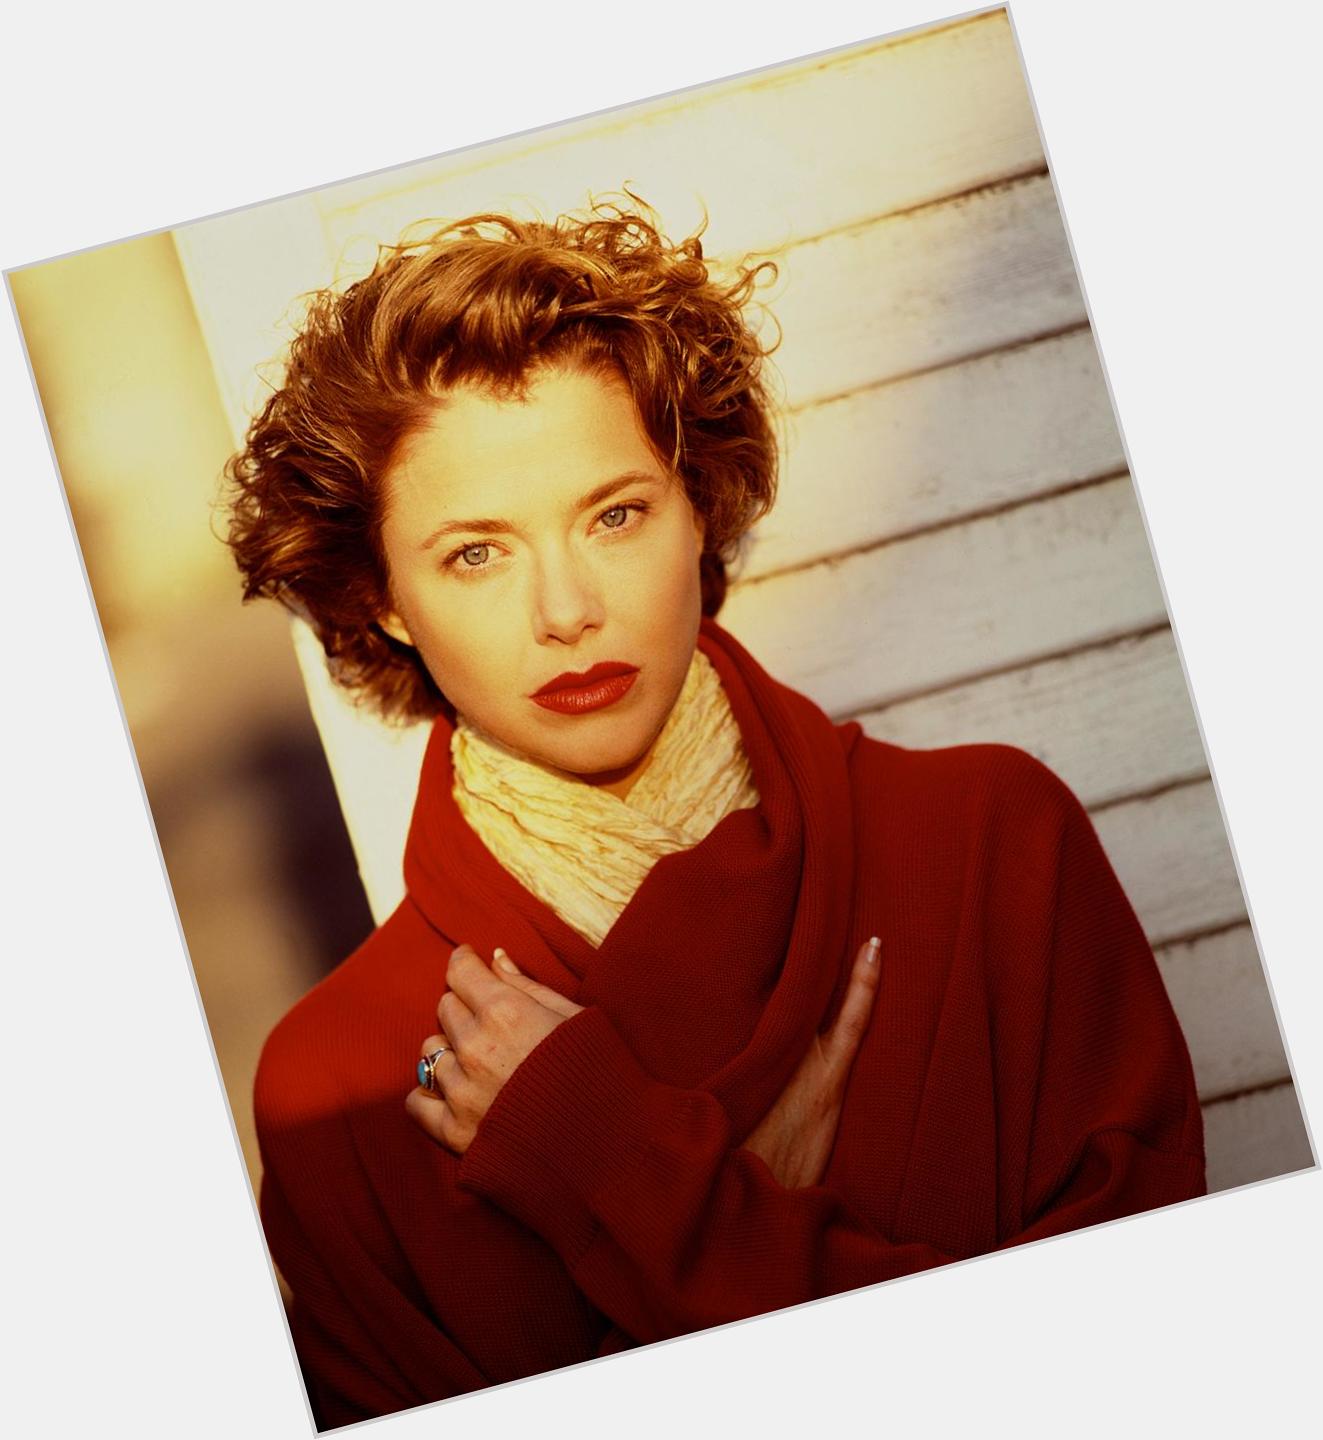 Happy Birthday to Annette Bening, who turns 57 today! 